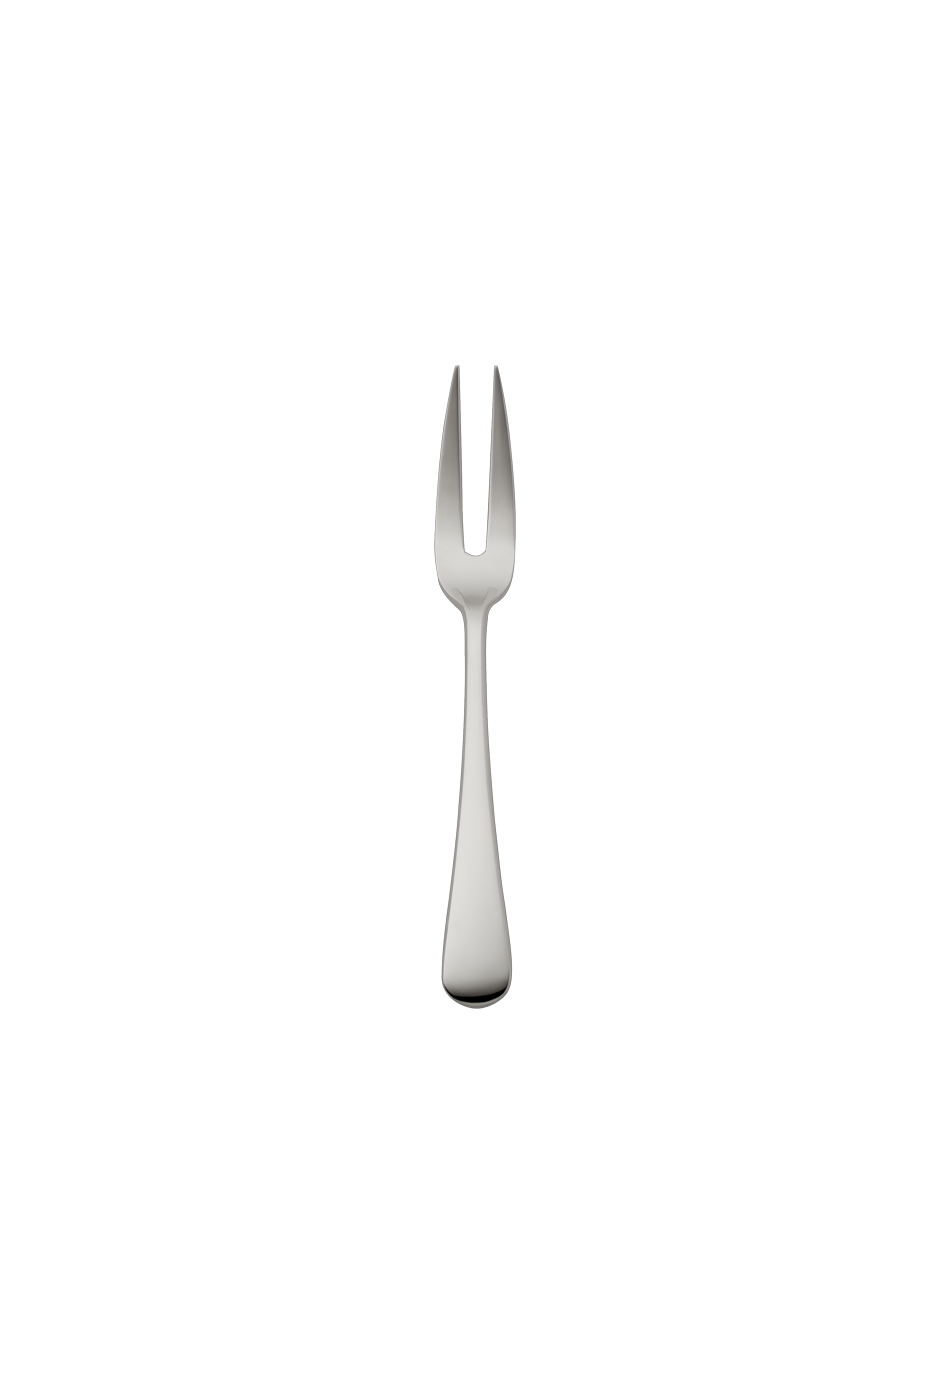 Como Meat Fork, small (18/8 stainless steel)